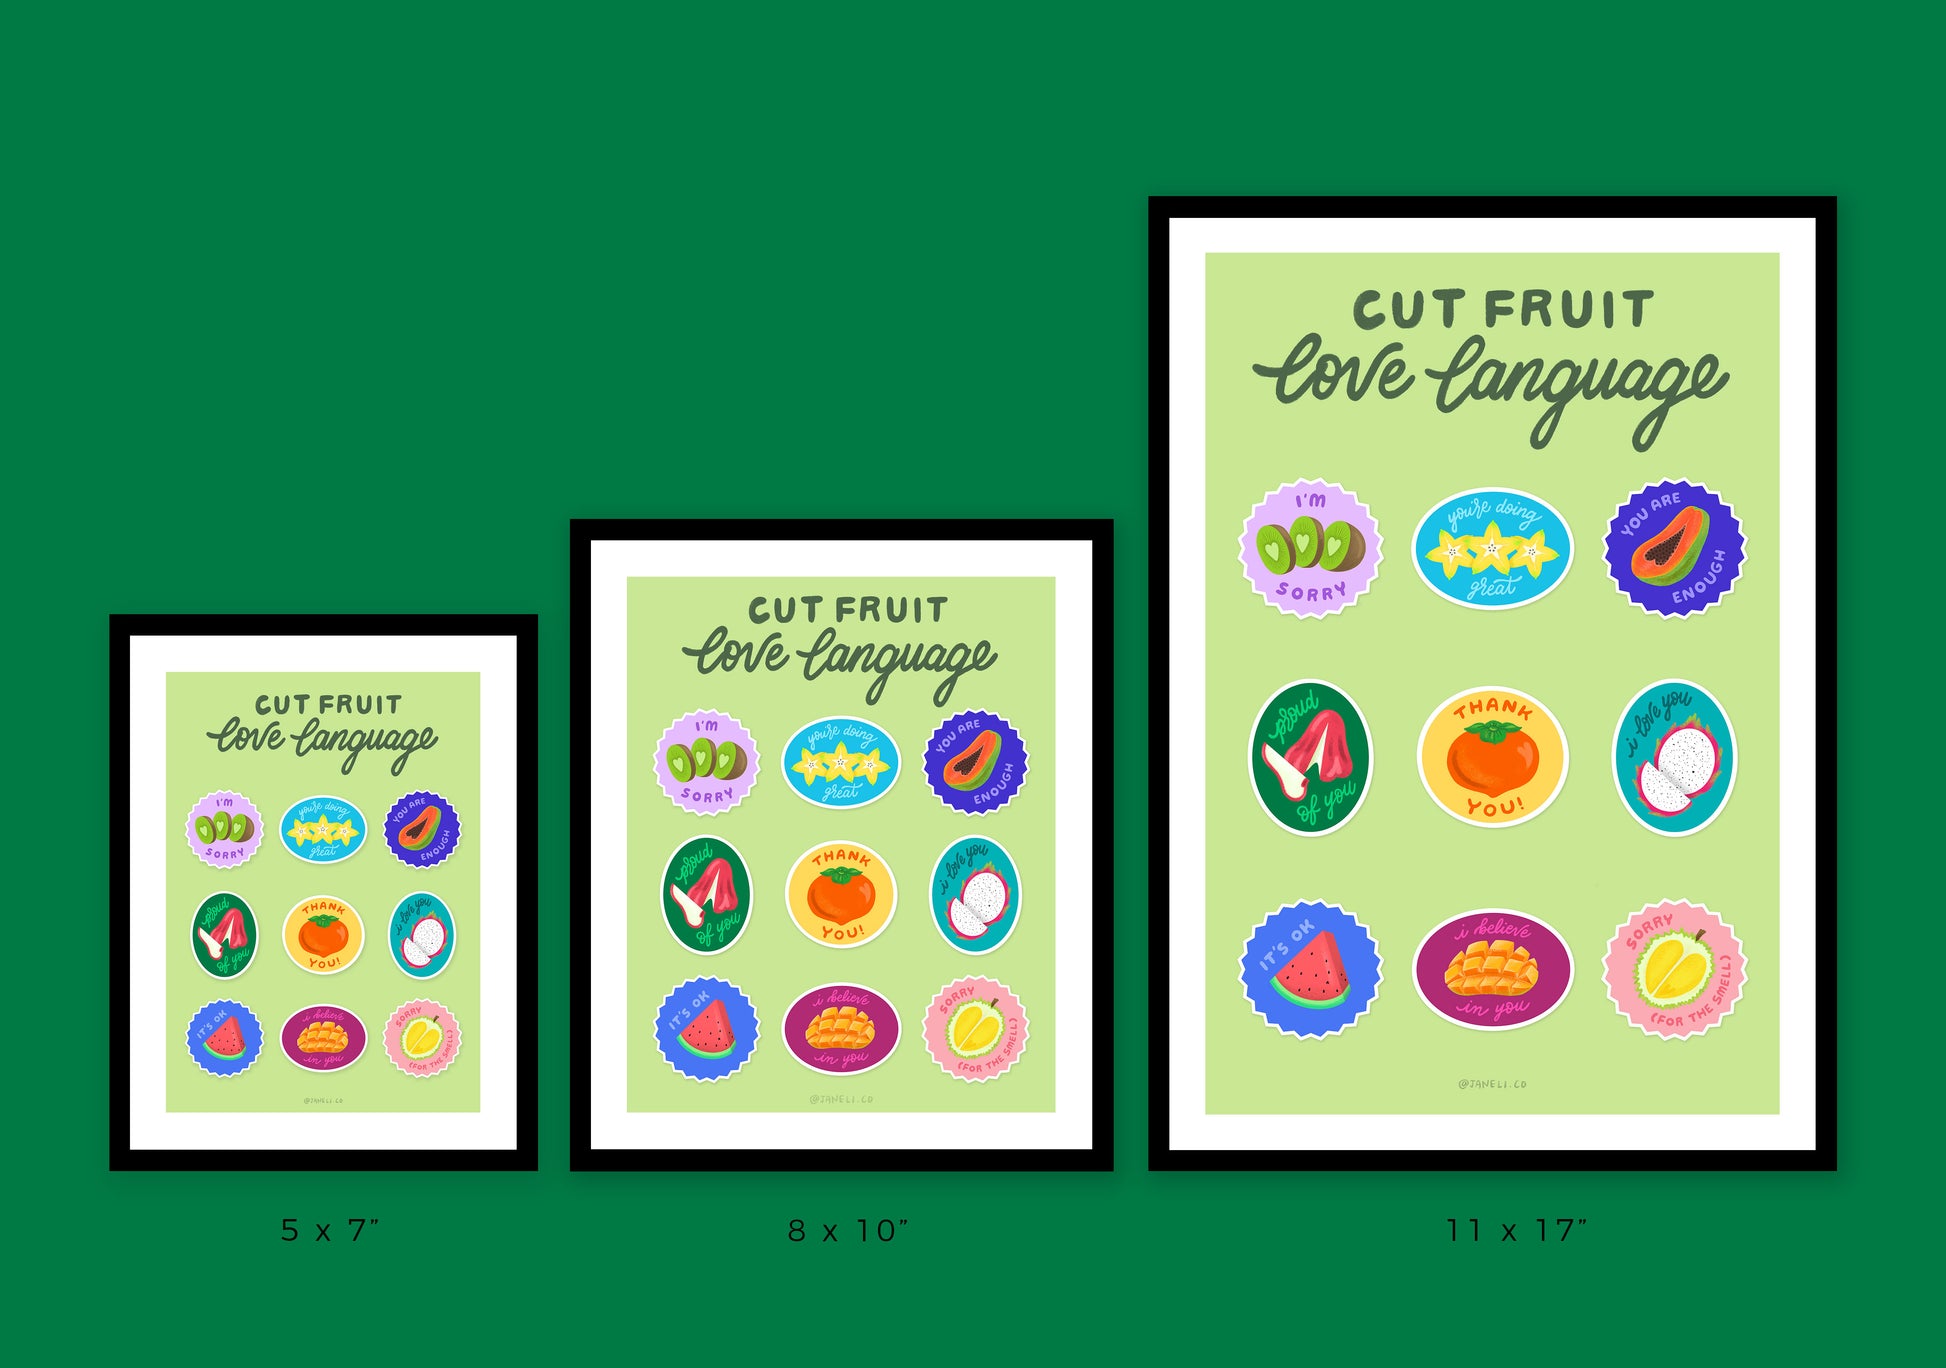 A digital mock of 3 framed JaneLi.Co prints that say "Cut Fruit Love Language" with 9 different fruit stickers with different messages like "I love you", "I'm sorry", and "I'm proud of you" over a green background. The prints show 3 sizes ( 5x7", 8x10", and 11x17") arranged from smallest to largest.